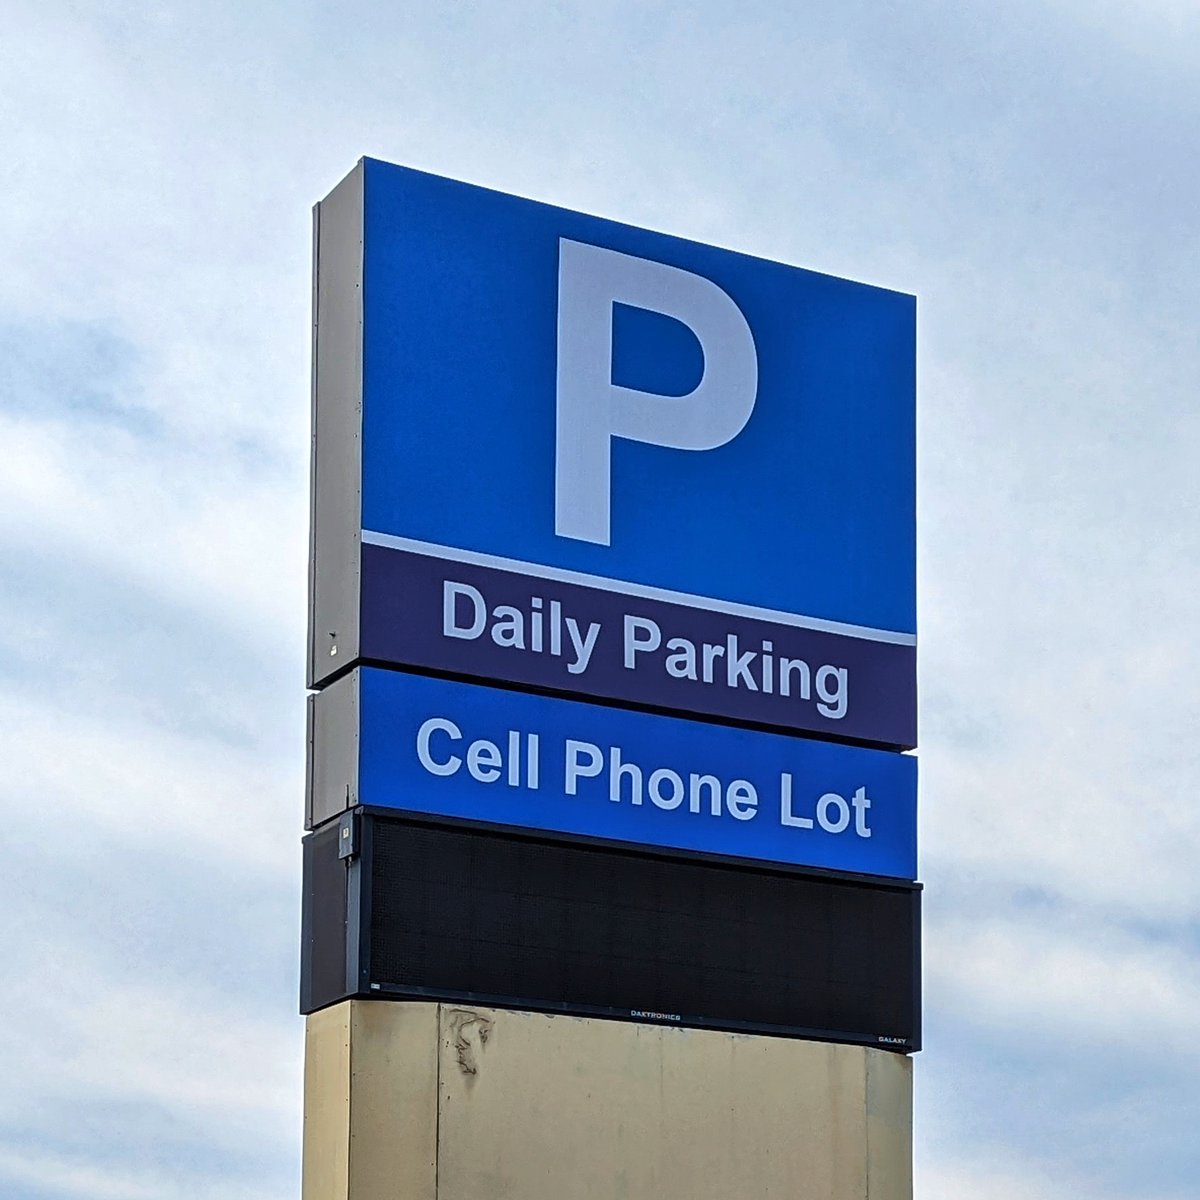 Picking up a loved one this weekend? 

Please wait in our Cell Phone Lot until they are ready to leave the terminal. Our Cell Phone Lot offers easy access to both the terminal and I-195.

Learn more at BWIairport.com/CellPhoneLot. #MDOTdelivers #airports